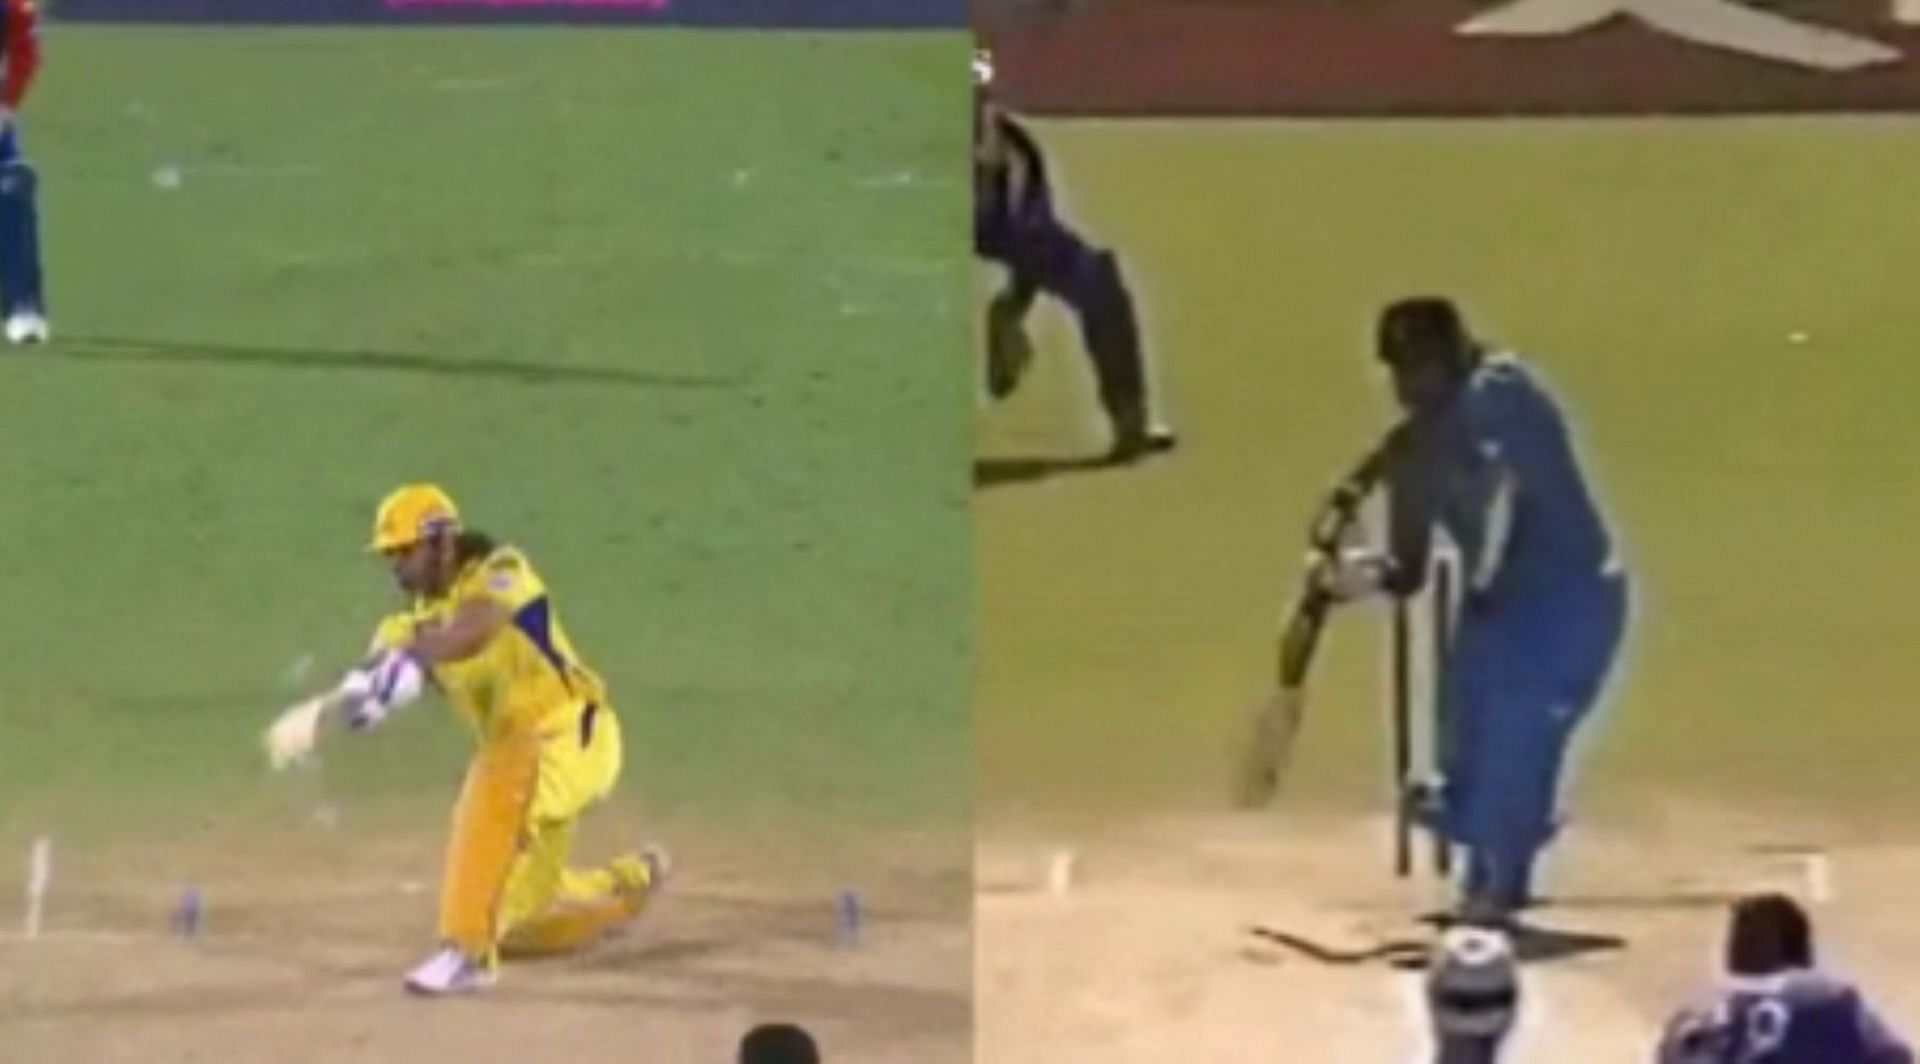 Dhoni had fans on the edge of their seats with his incredible ball-striking